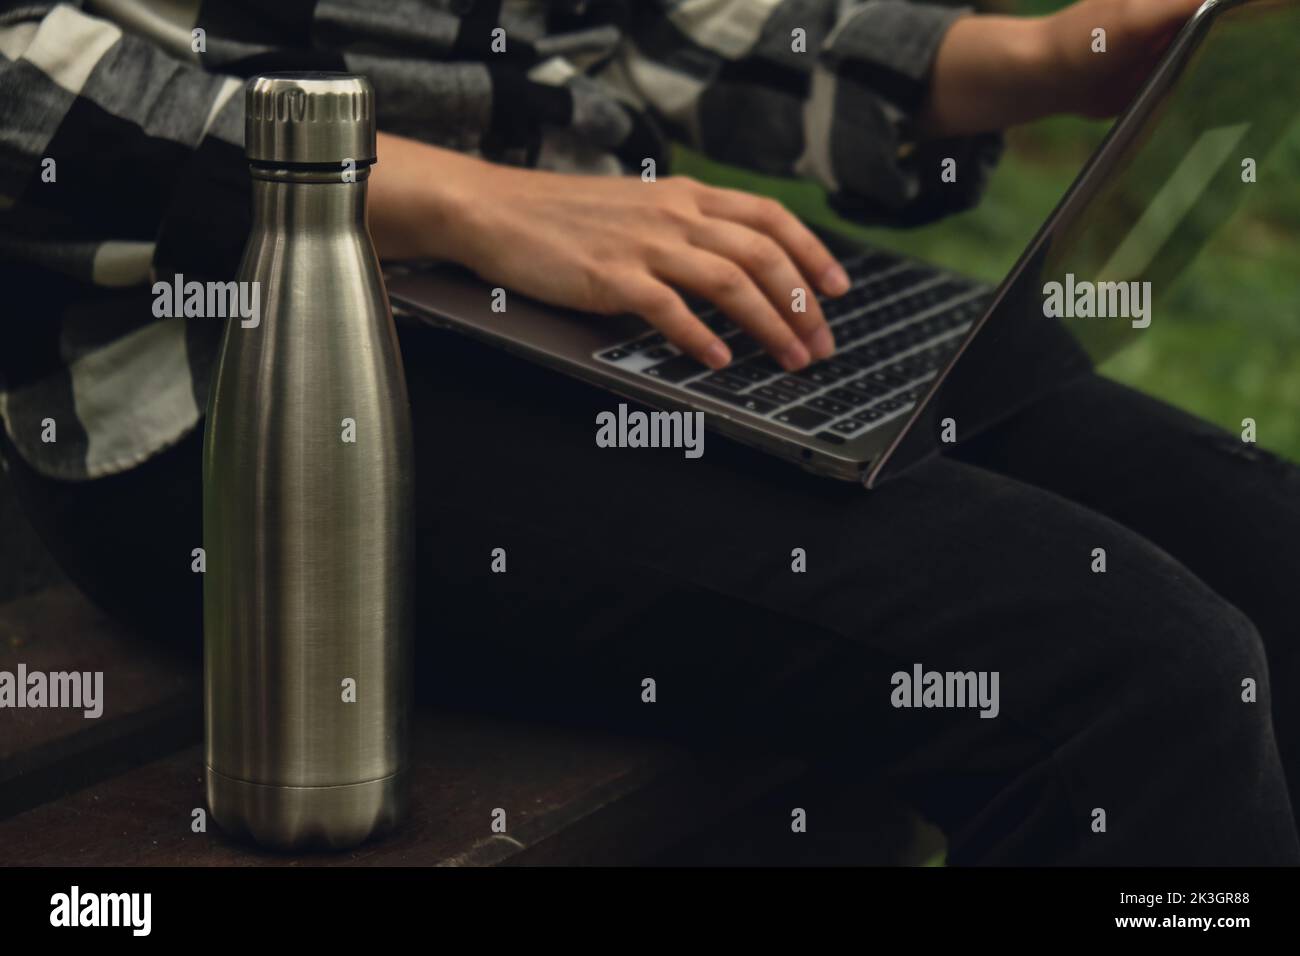 https://c8.alamy.com/comp/2K3GR88/water-bottle-reusable-steel-thermo-water-bottle-on-wooden-bench-sustainable-lifestyle-plastic-free-zero-waste-free-living-go-green-environment-protection-woman-student-work-study-with-laptop-in-park-2K3GR88.jpg